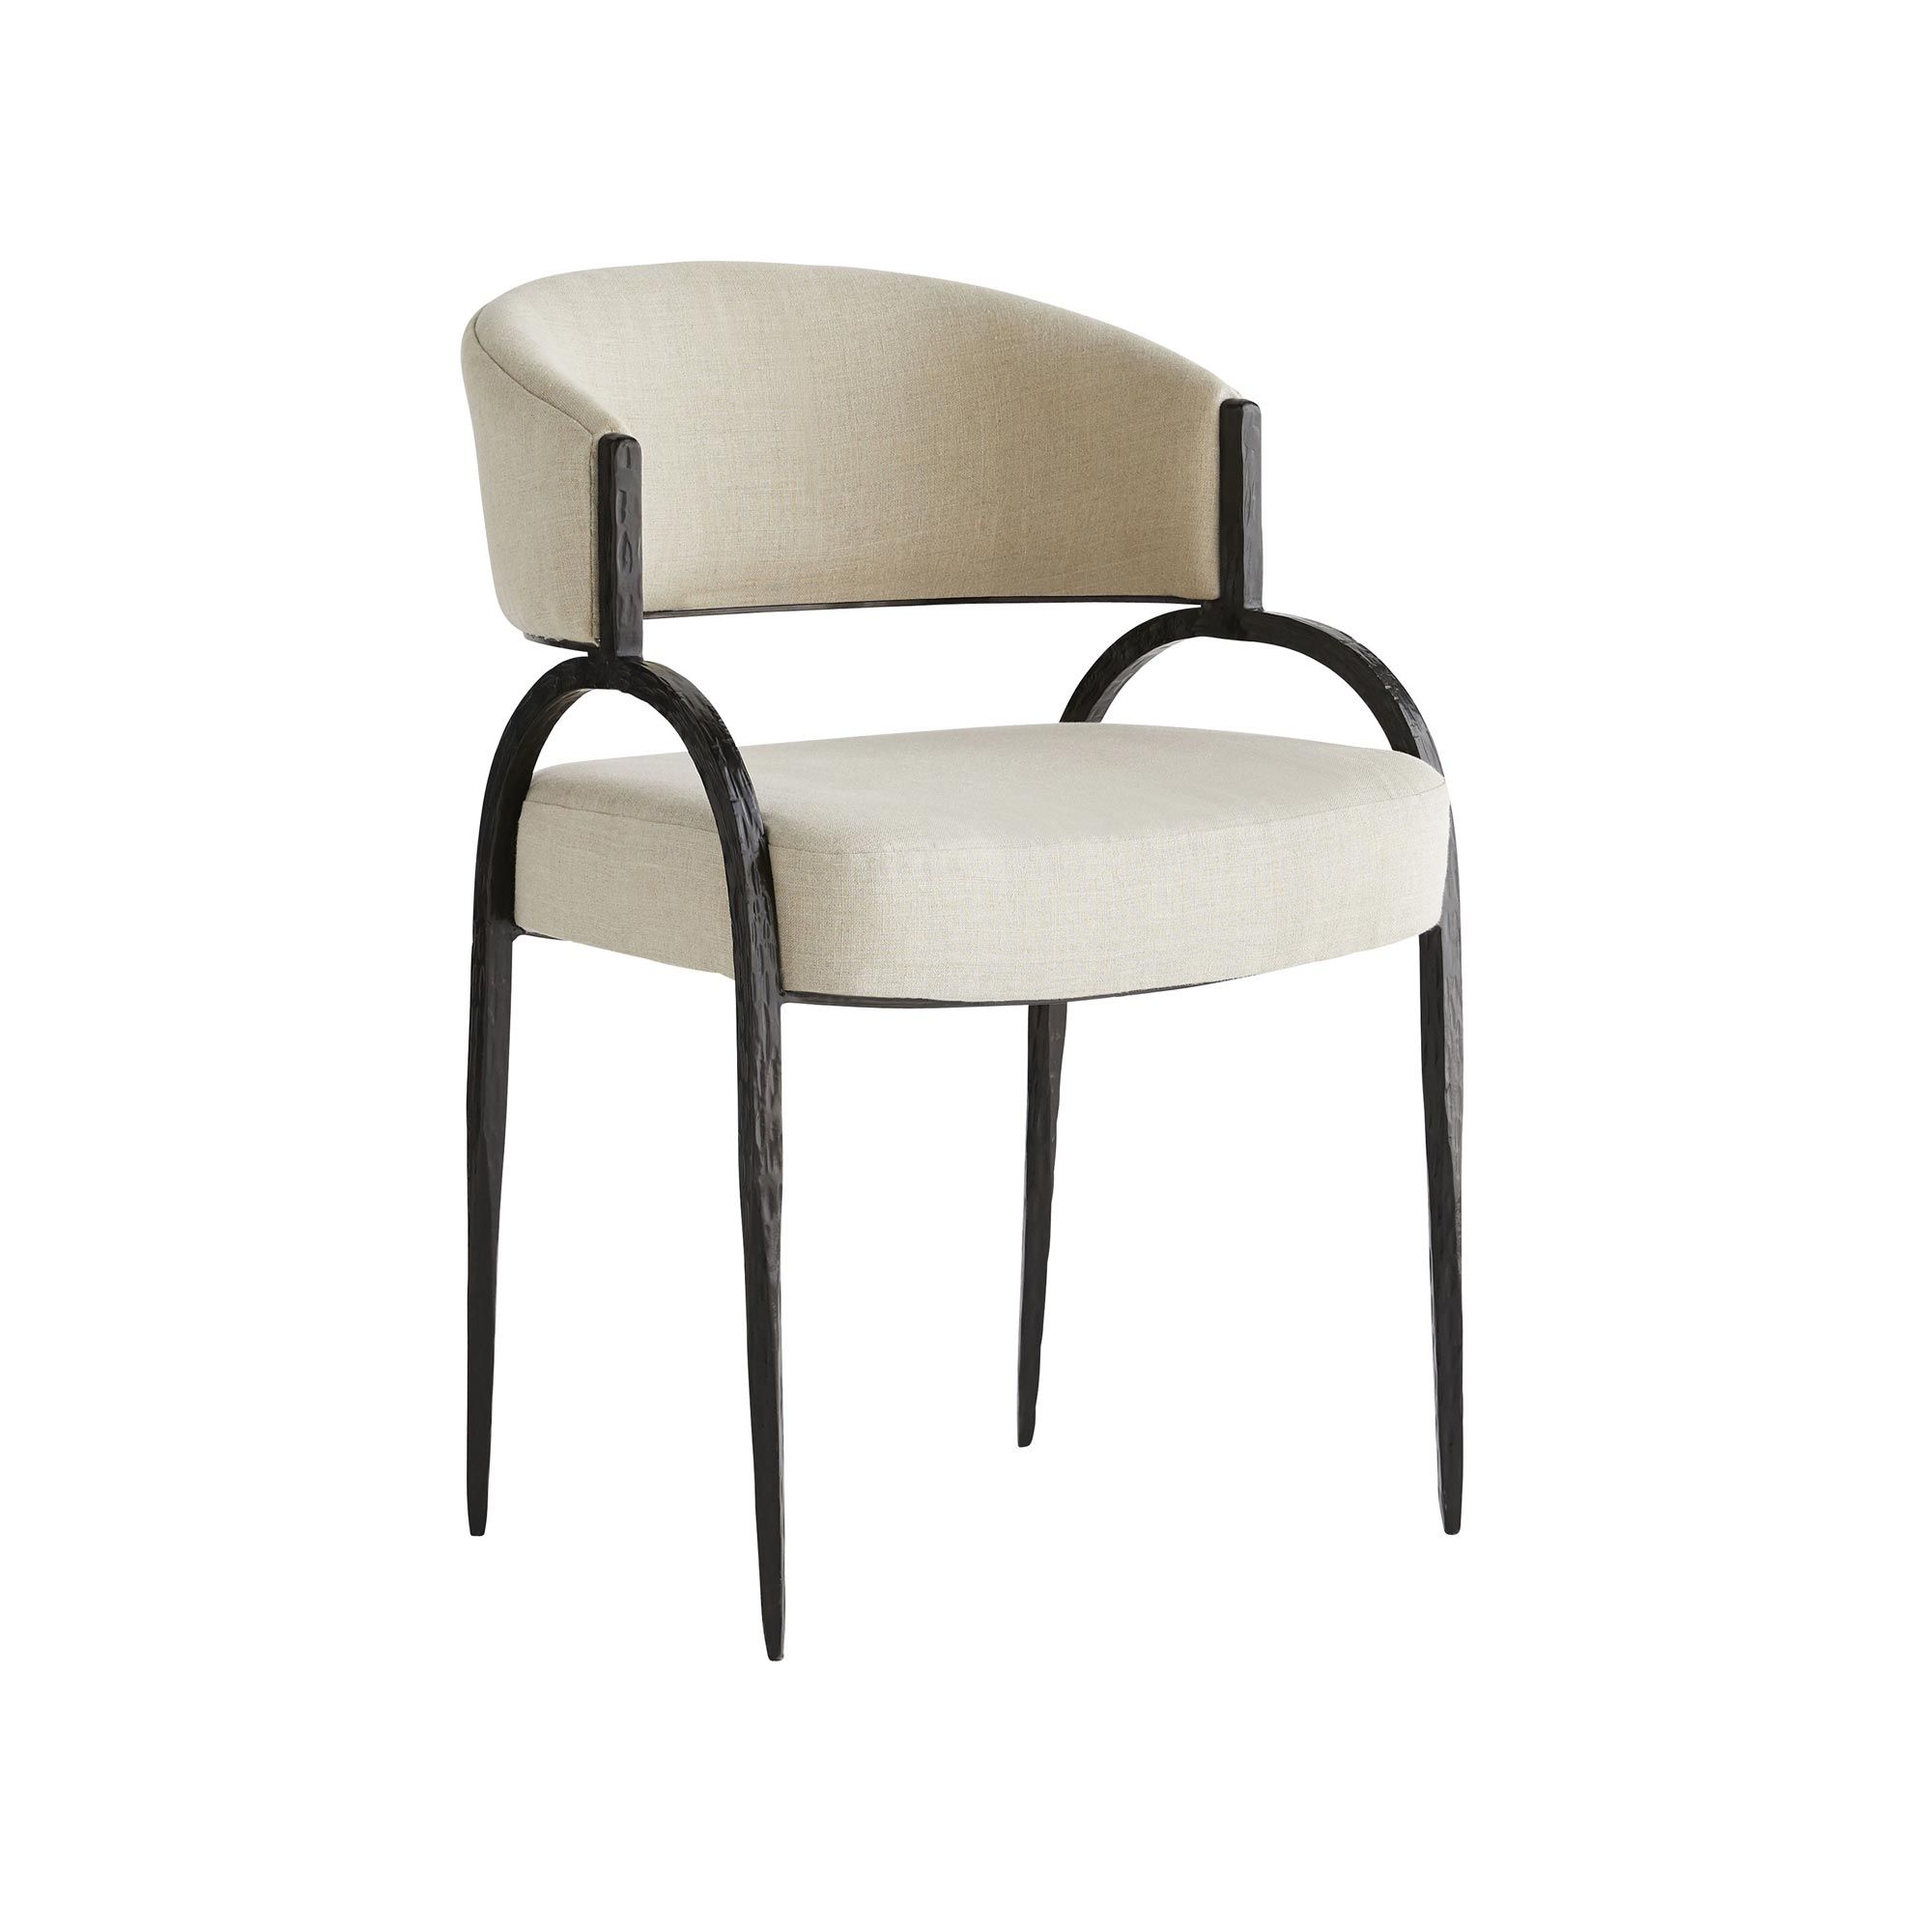 Add dining chairs to your tables for
additional comfort